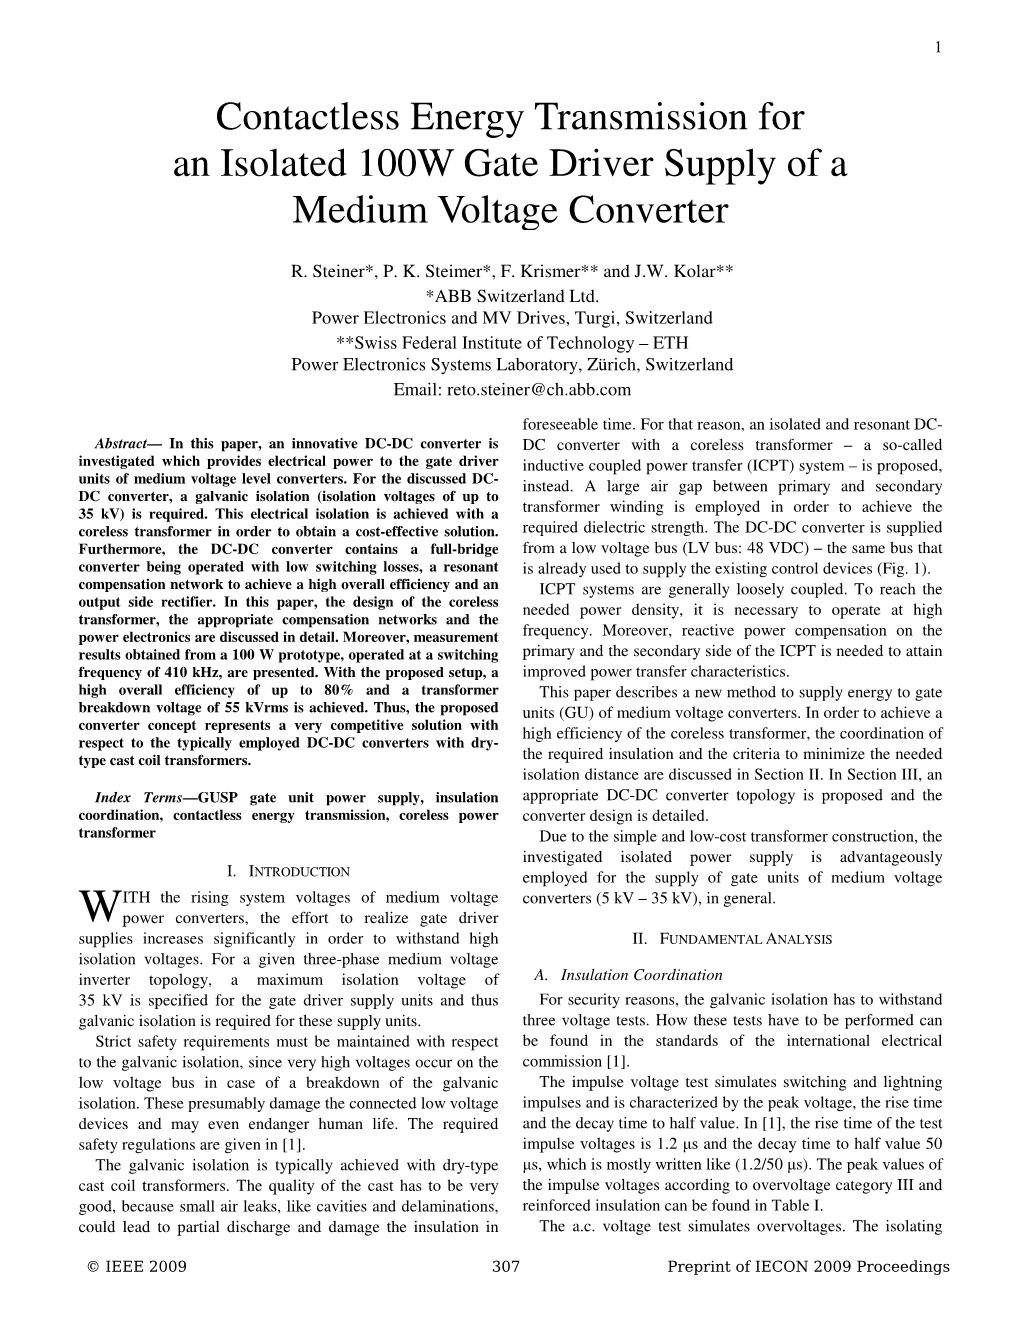 Contactless Energy Transmission for an Isolated 100W Gate Driver Supply of a Medium Voltage Converter